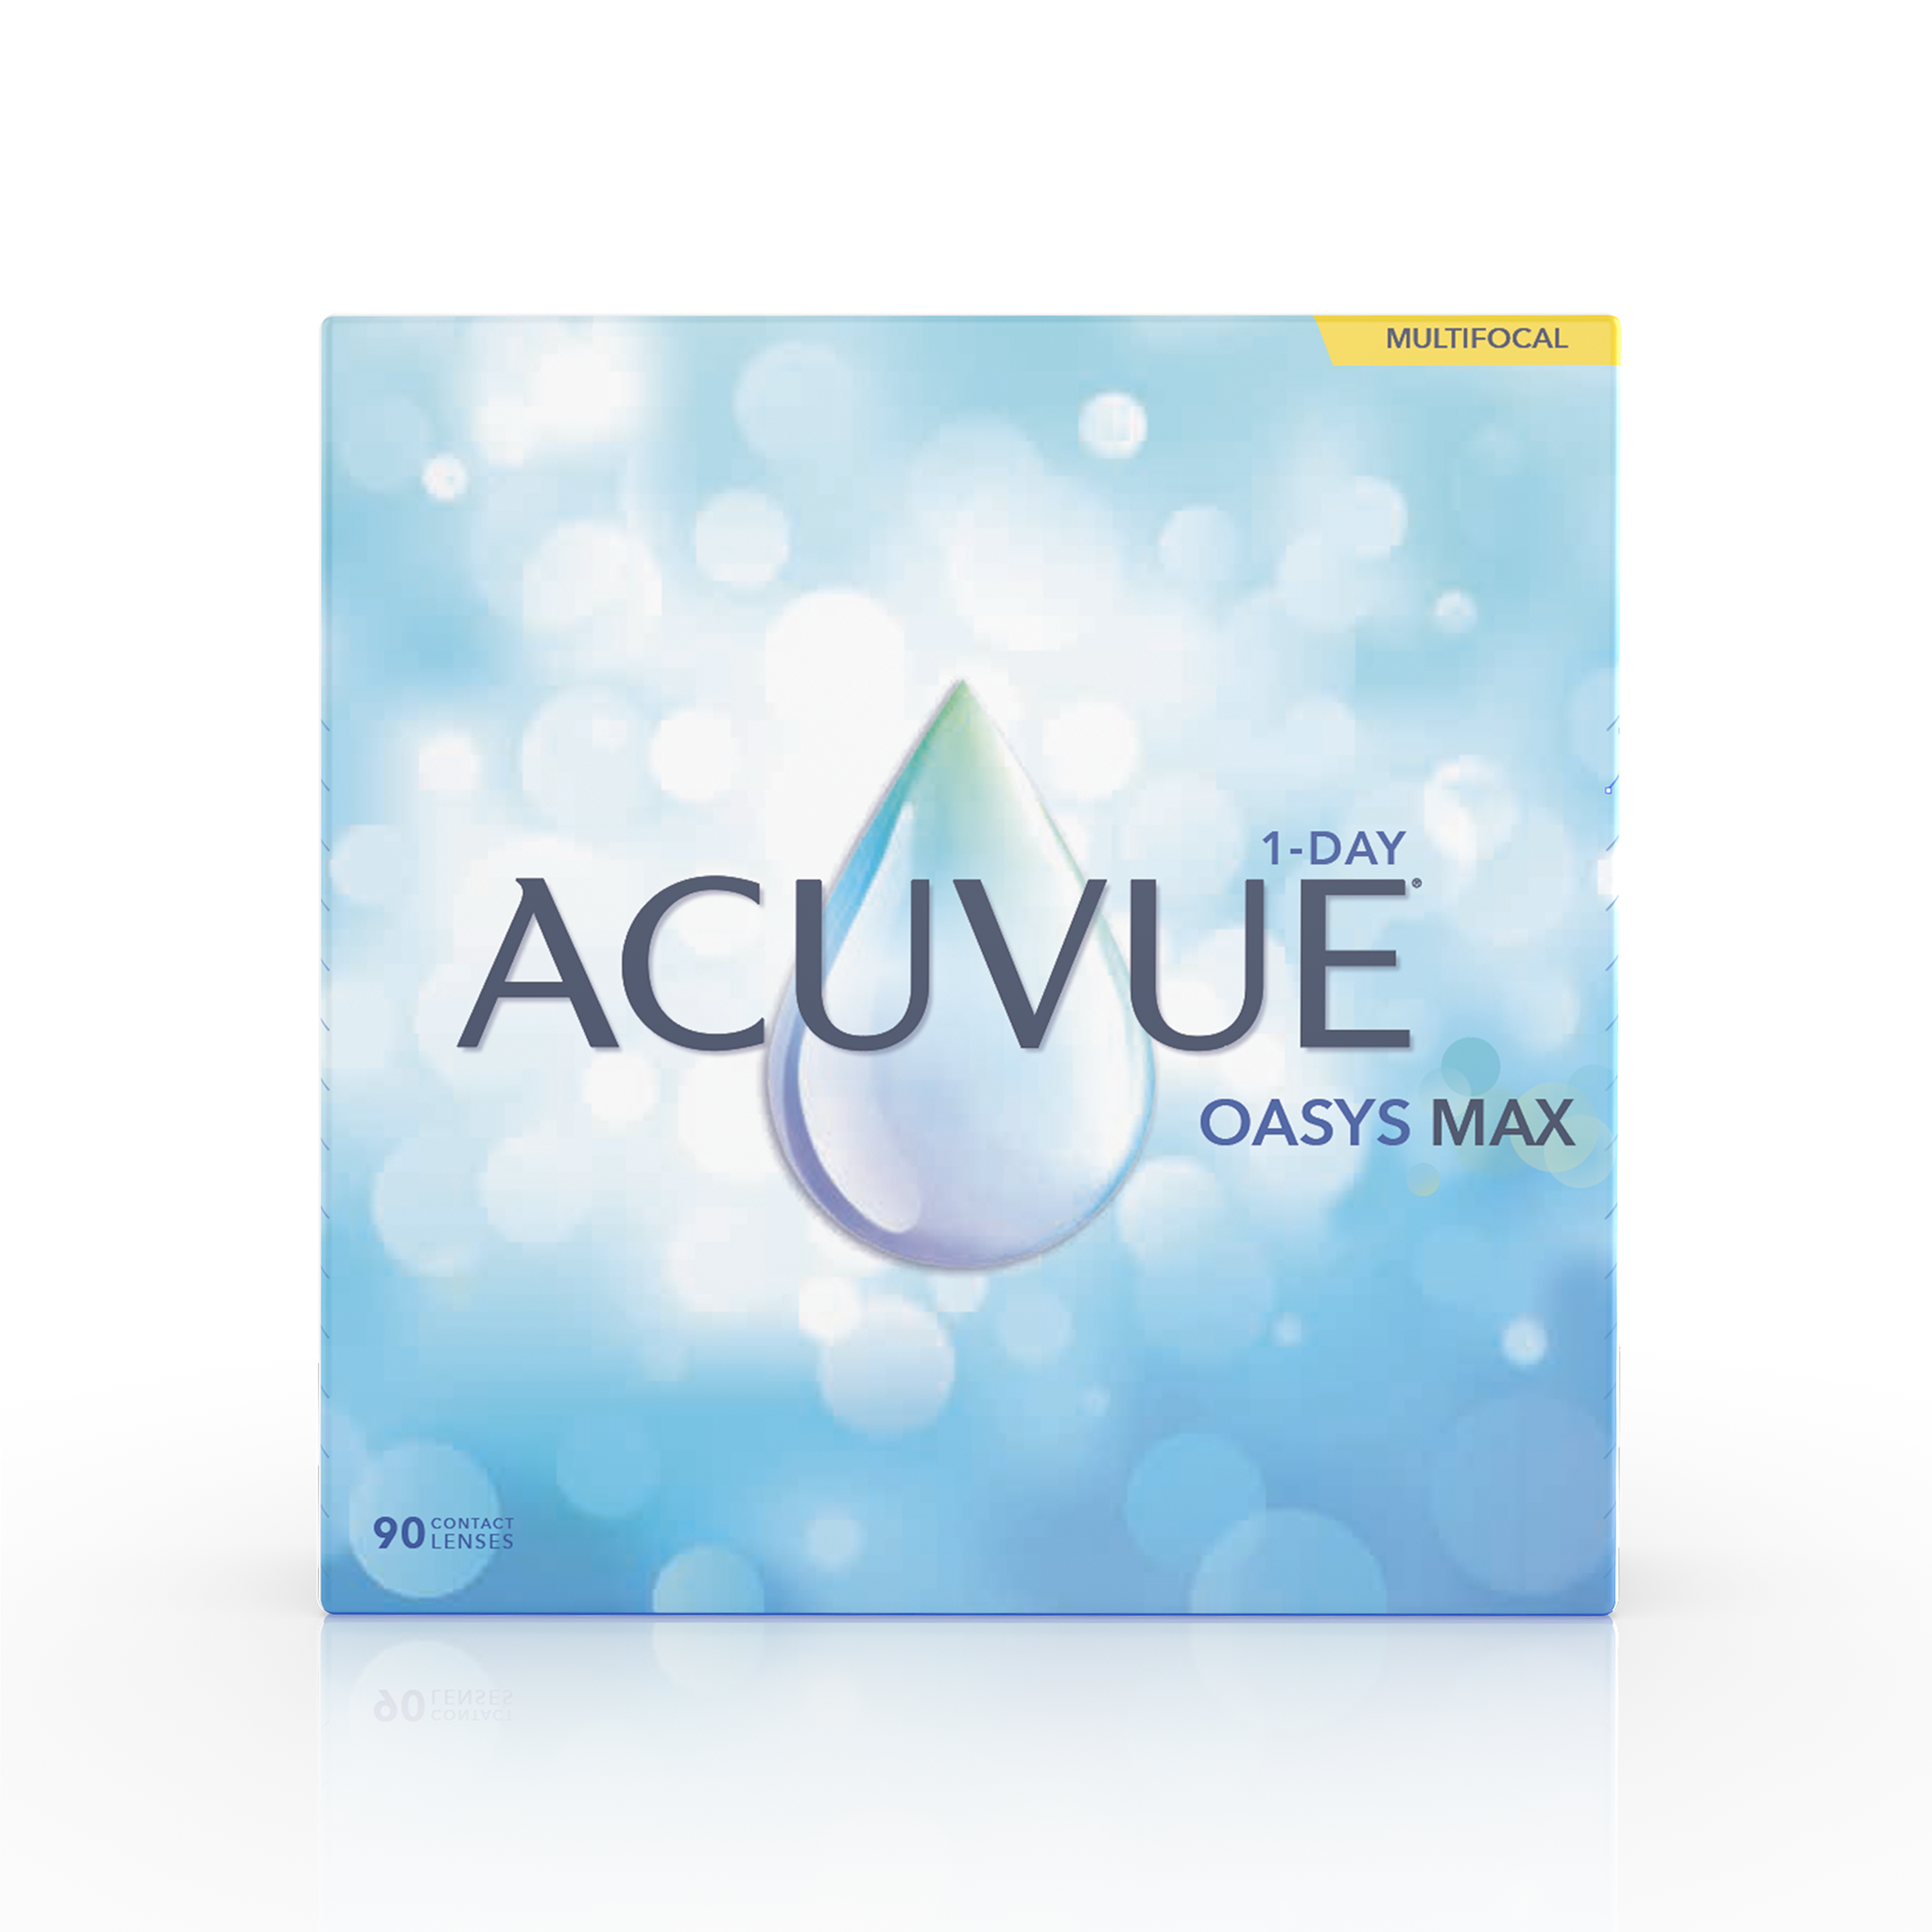 ACUVUE OASYS MAX 1 DAY MULTIFOCAL (90pk) - NEW